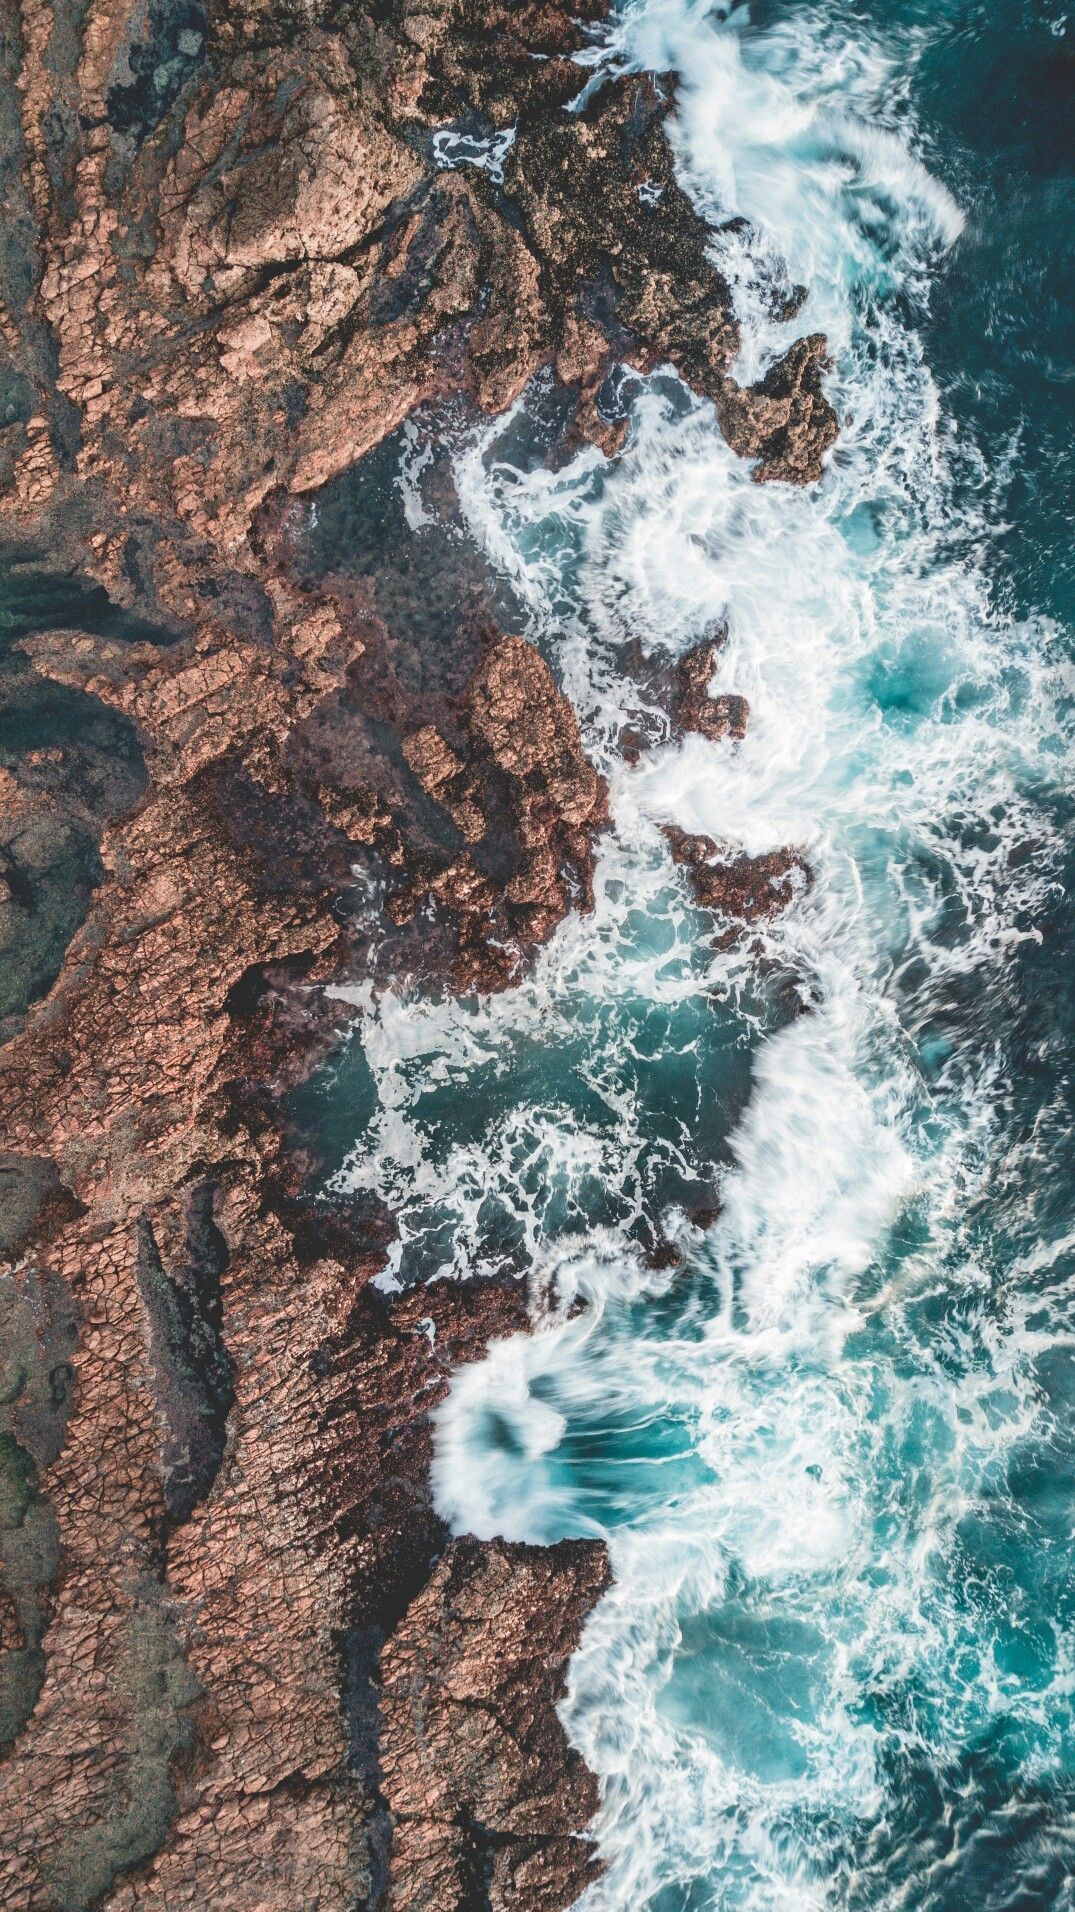 4k Drone Pictures  Download Free Images on Unsplash